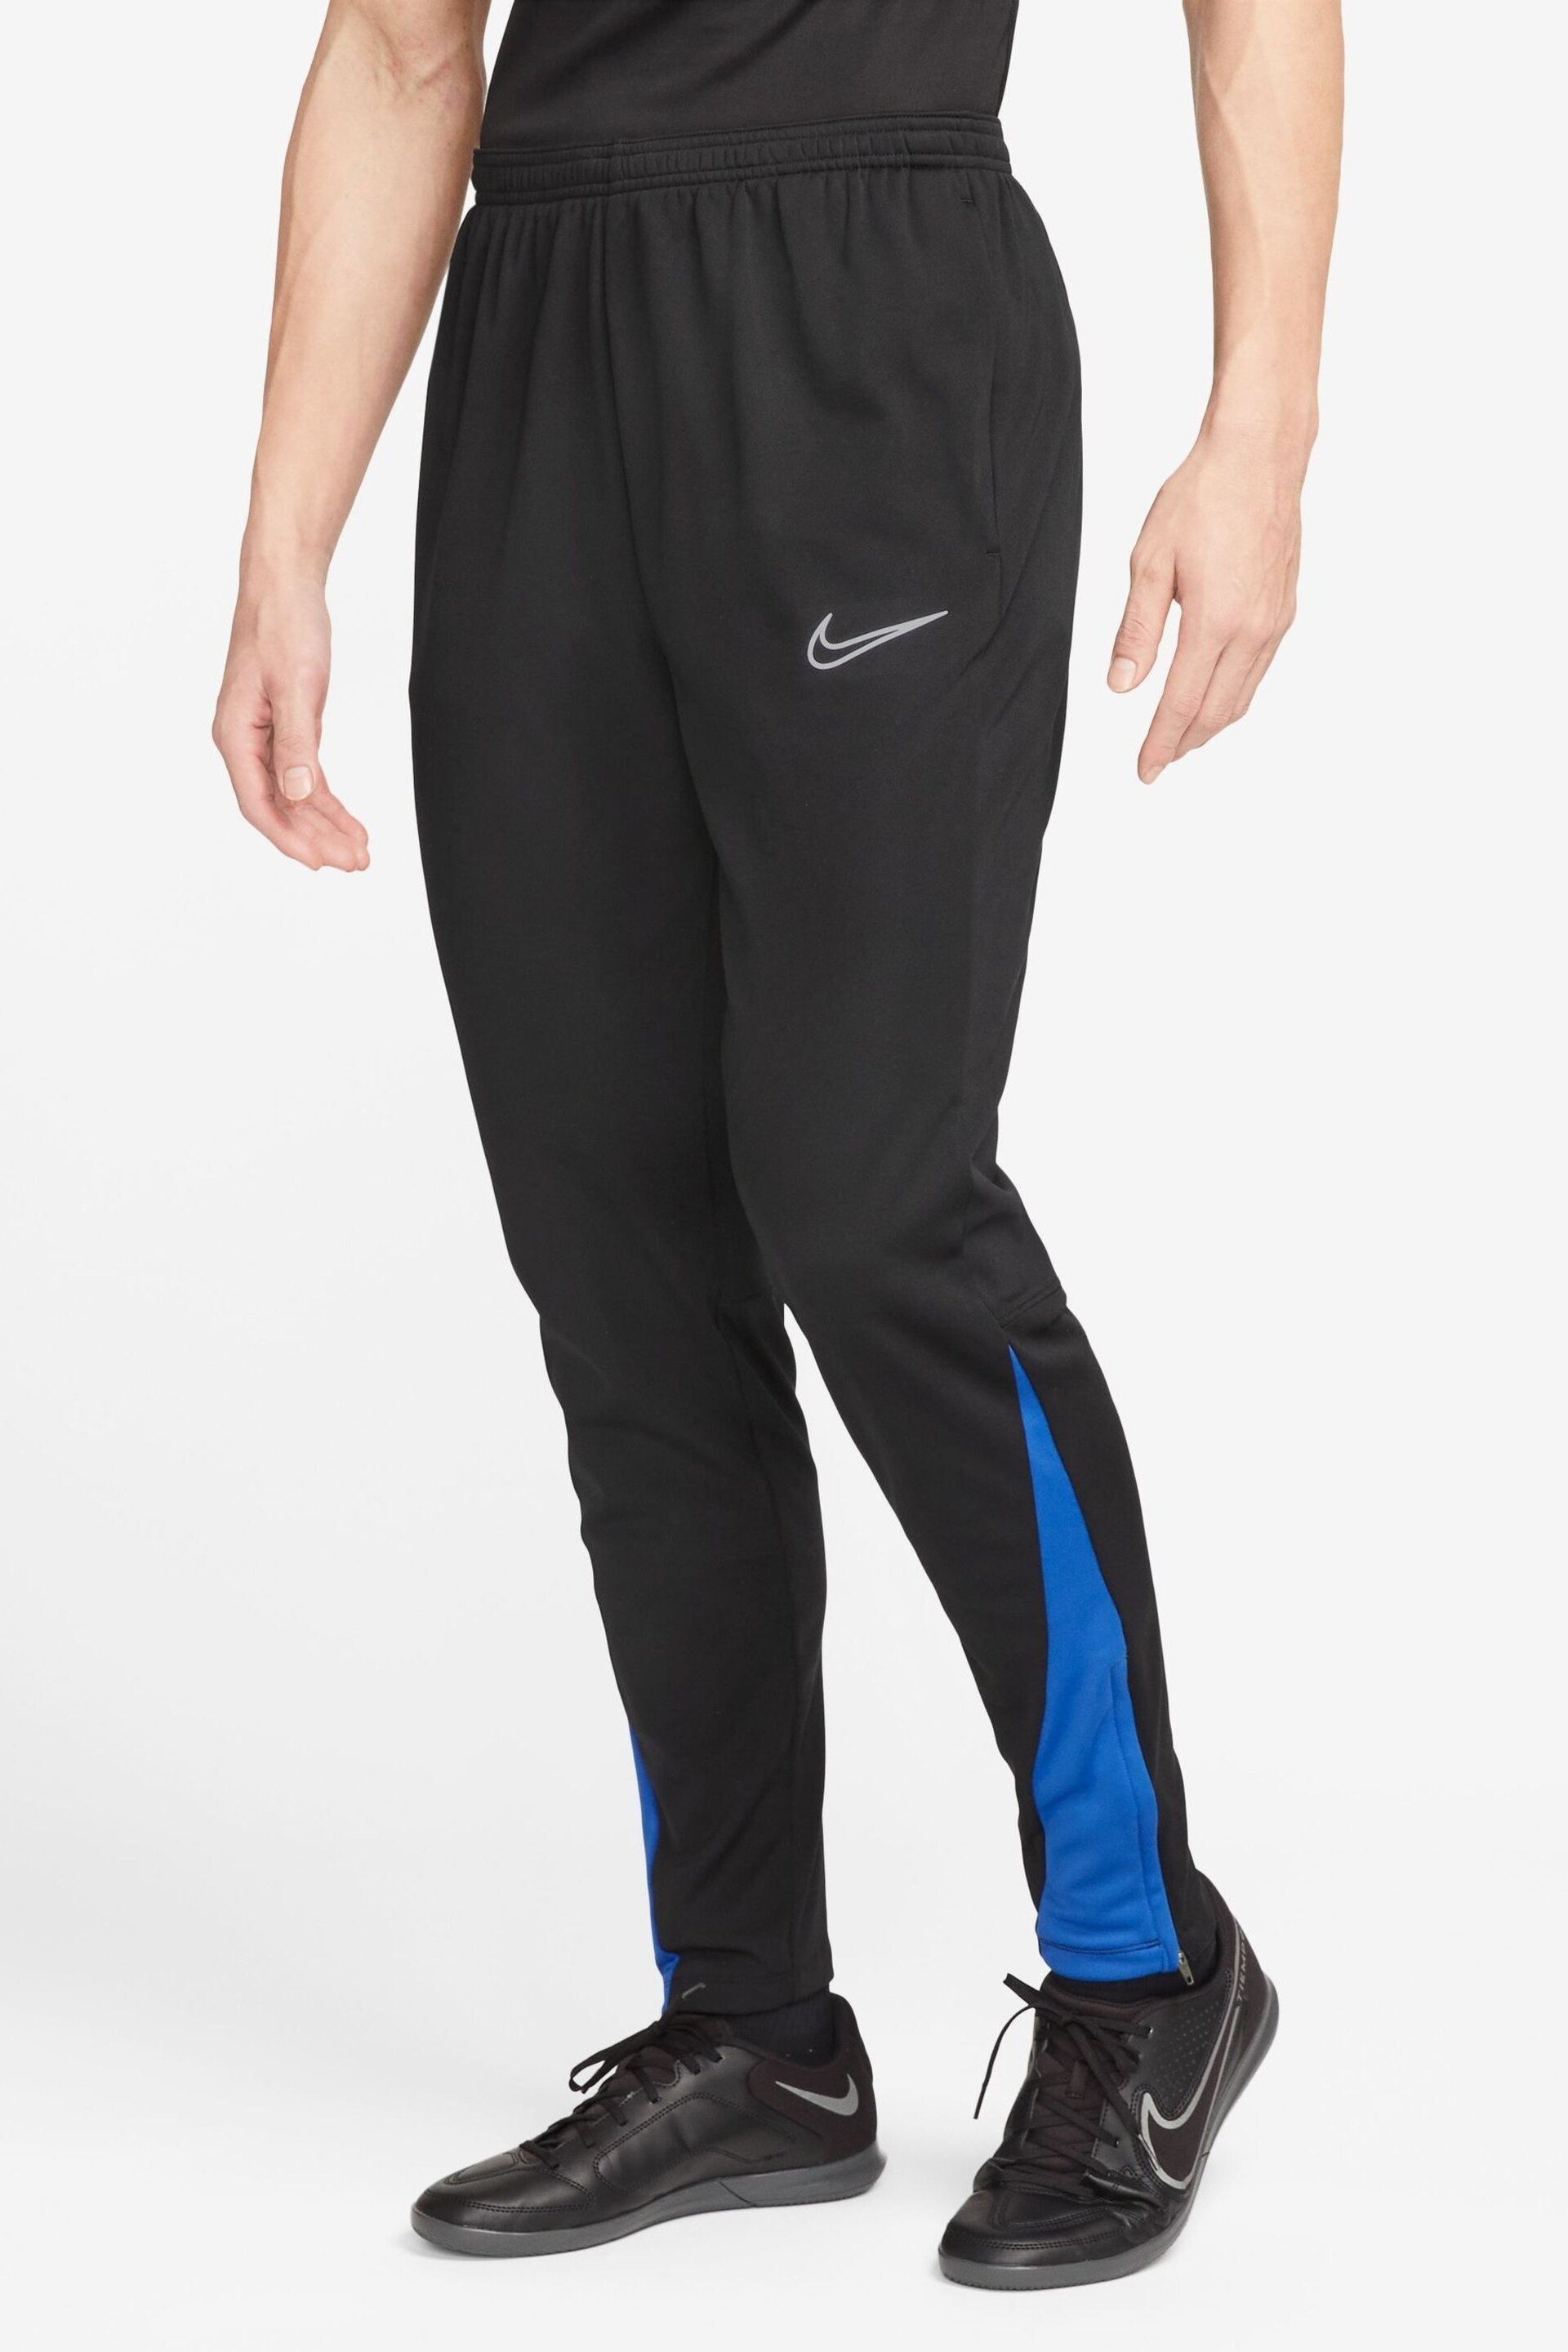 Nike Black Therma-FIT Academy Training Joggers - Image 1 of 3